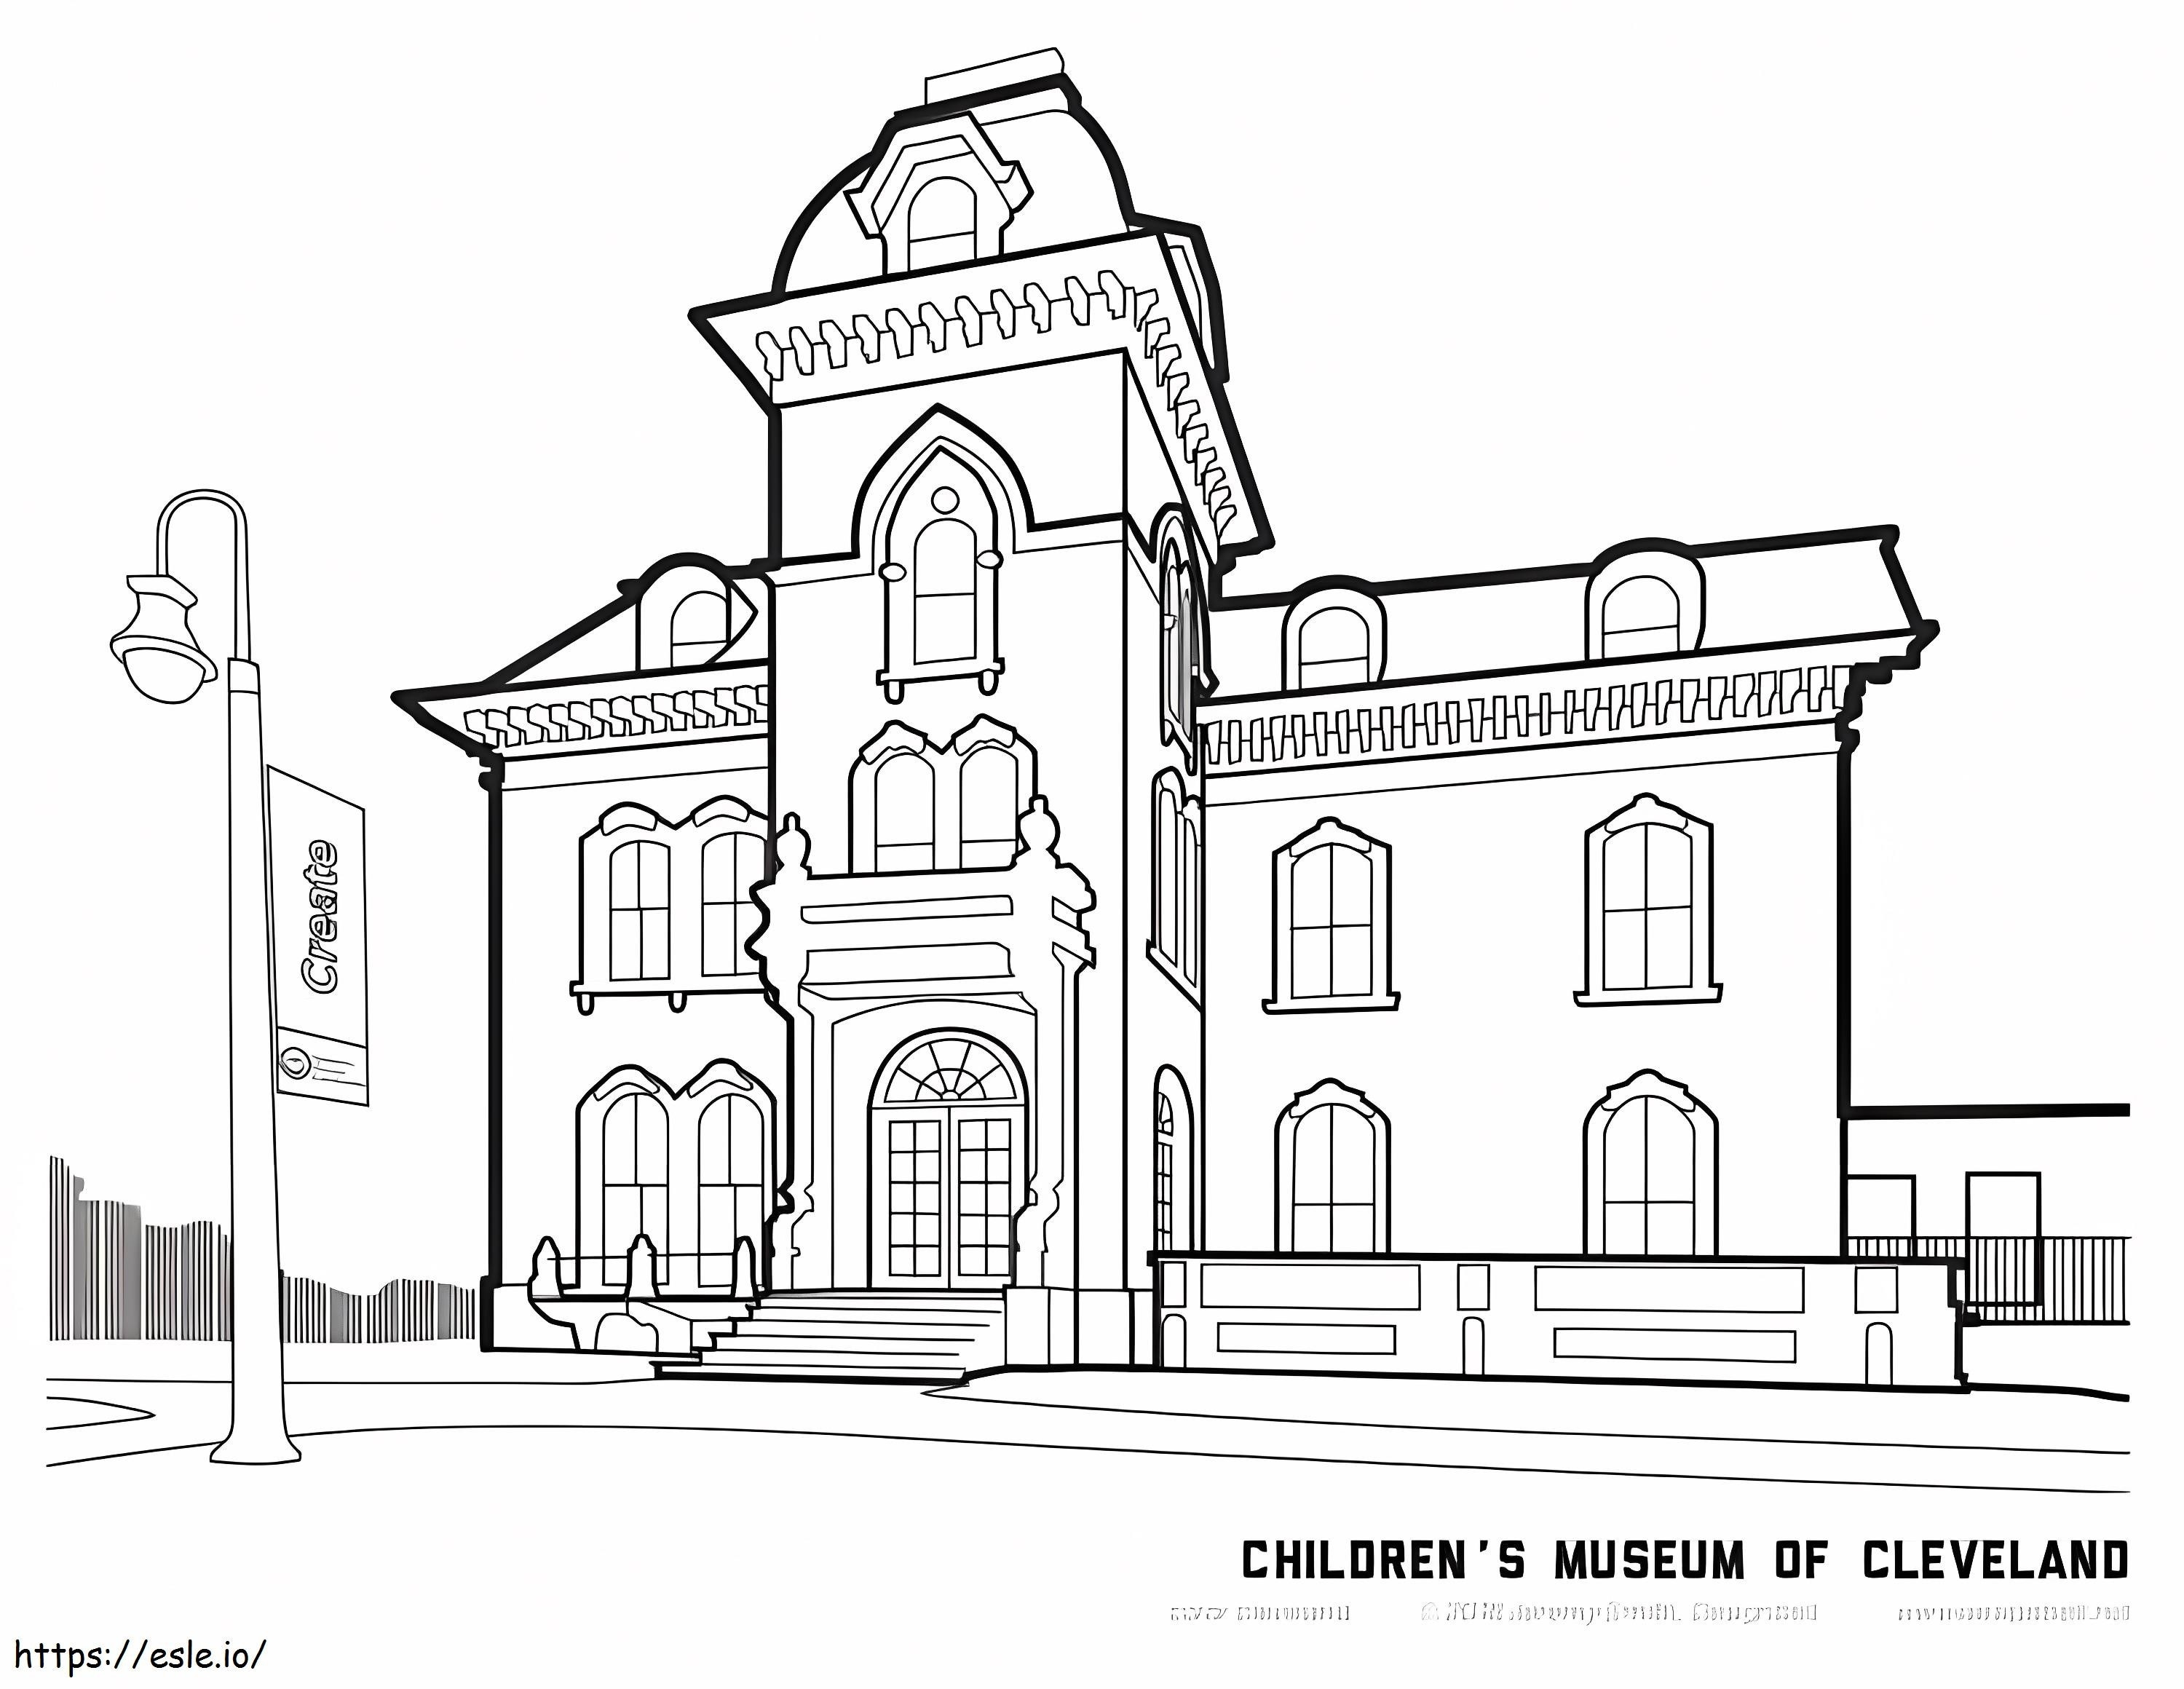 Childrens Museum Of Cleveland coloring page